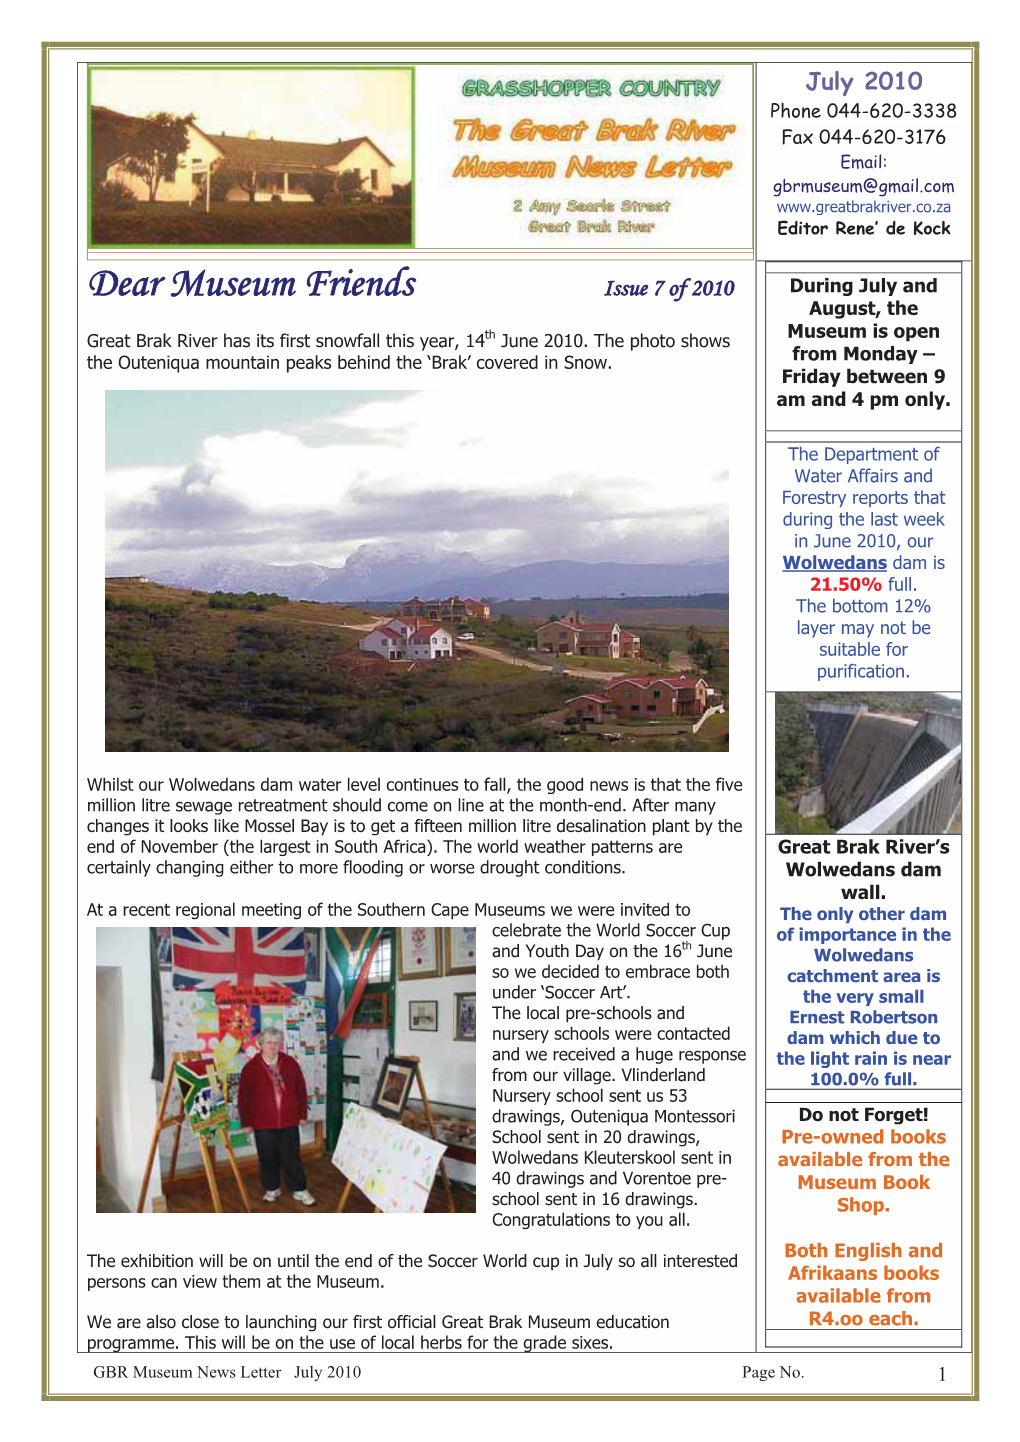 Dear Museum Friends Issue 7 of 2010 During July and August, the Th Museum Is Open Great Brak River Has Its First Snowfall This Year, 14 June 2010